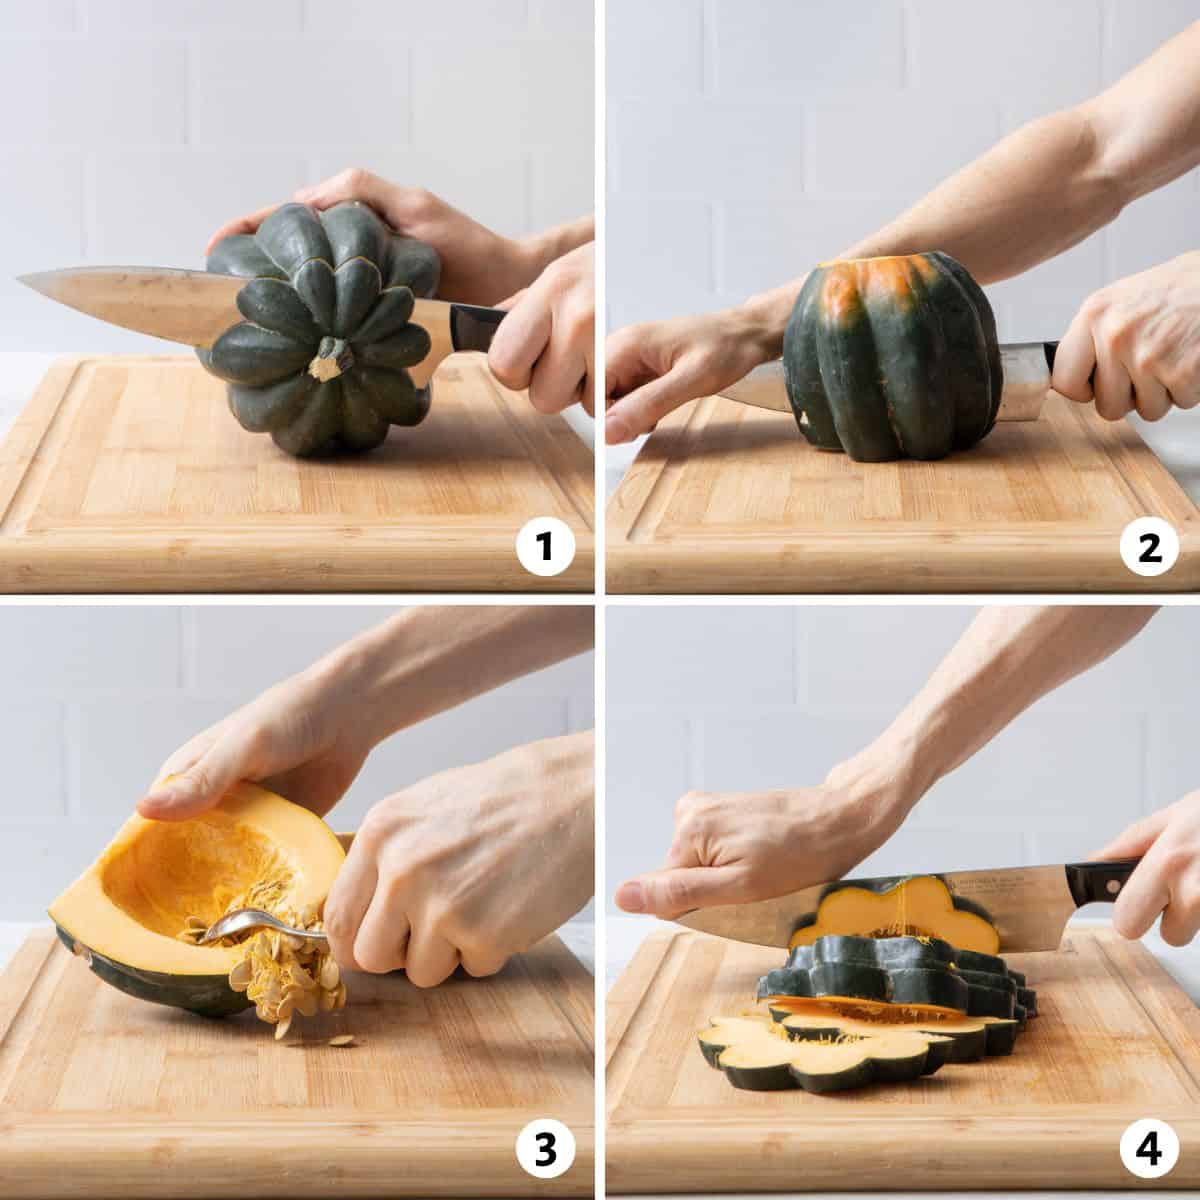 4 image collage prepparing acorn squash by cutting the stem off, then cutting in half, removing the pulp, and the slicing.